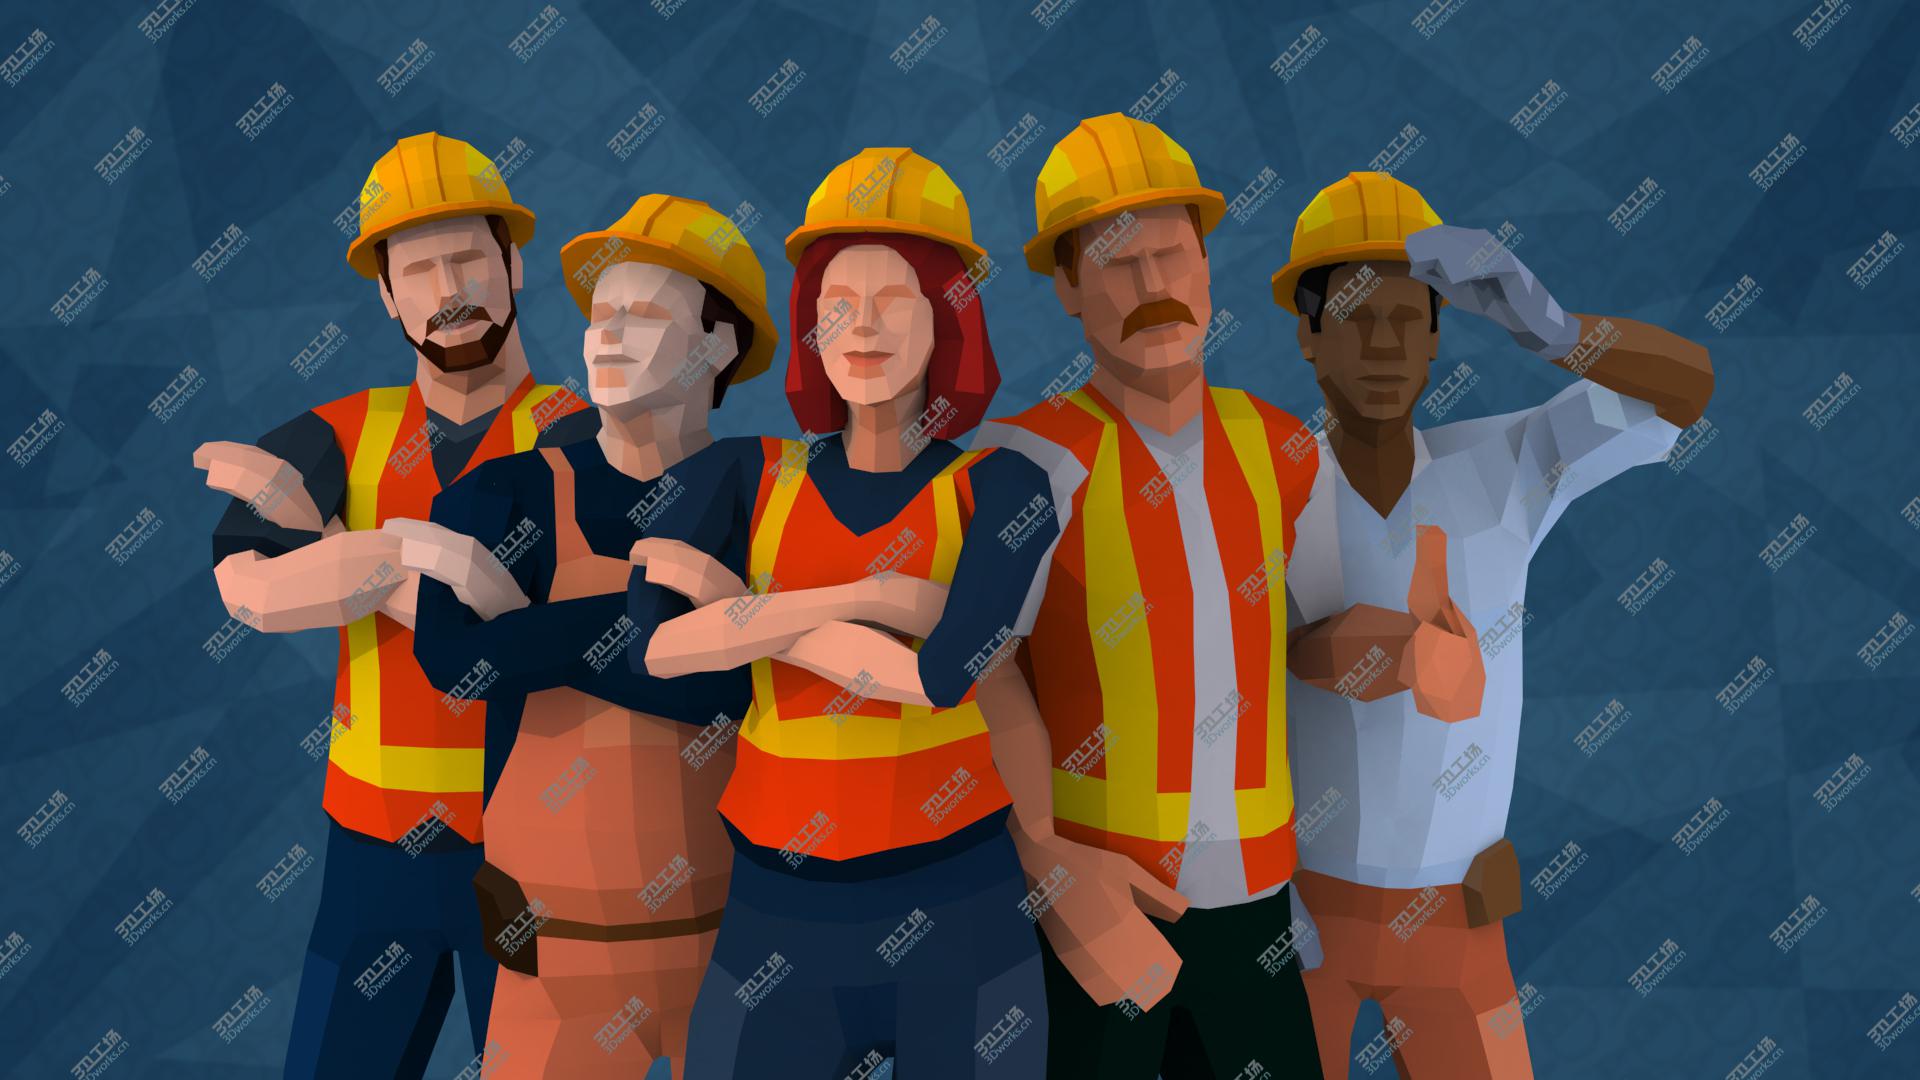 images/goods_img/20210313/3D LowPoly People Professions Rigged Bundle model/4.jpg